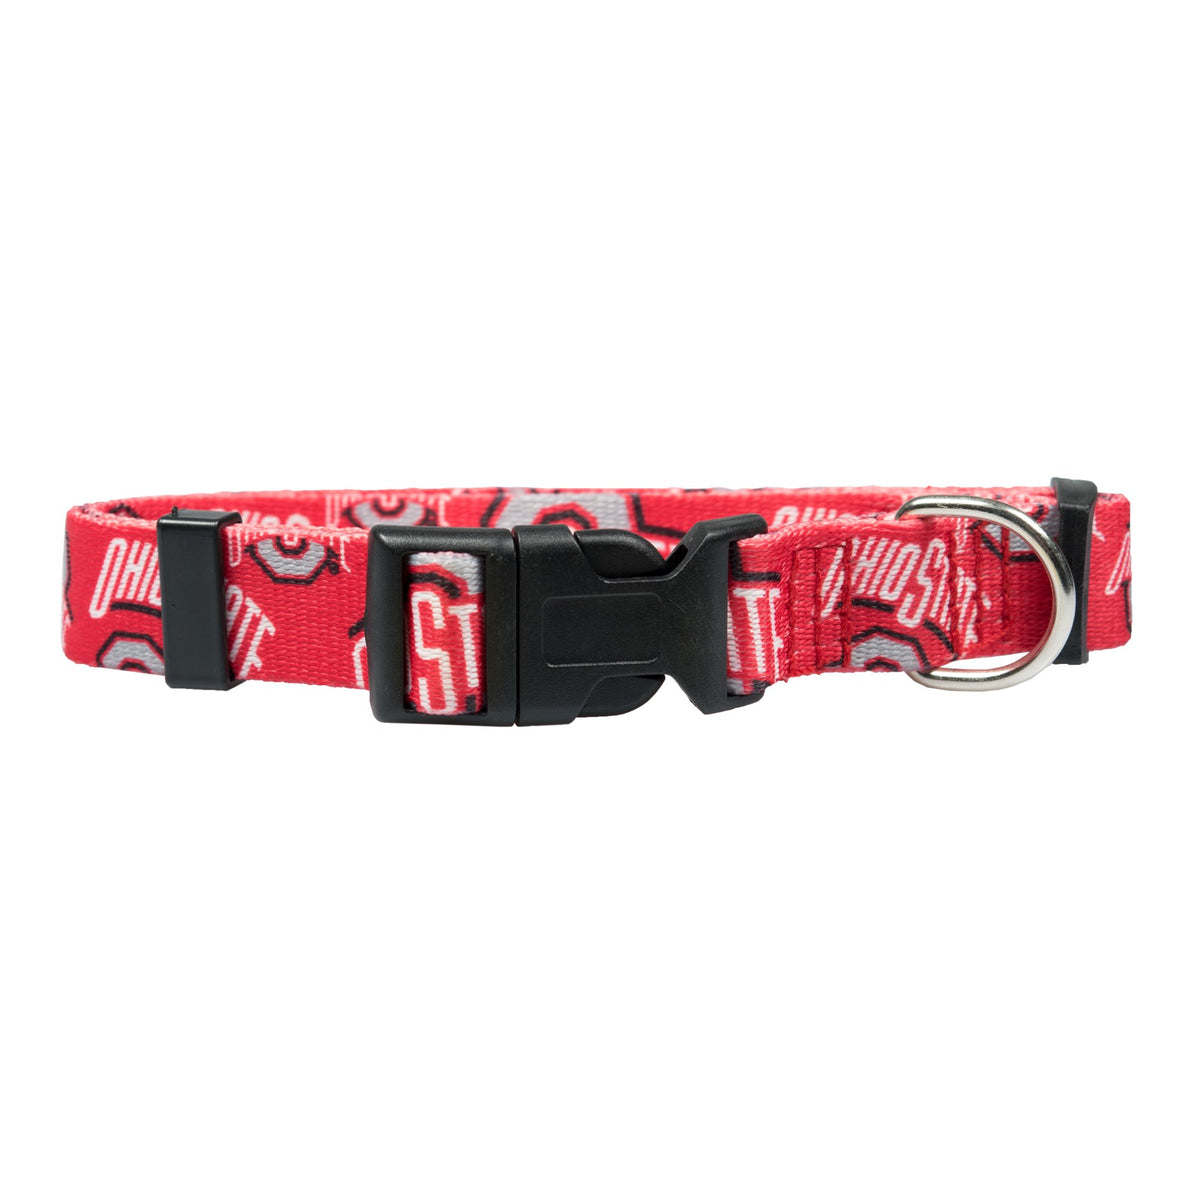 OH State Buckeyes Ltd Dog Collar or Leash - 3 Red Rovers